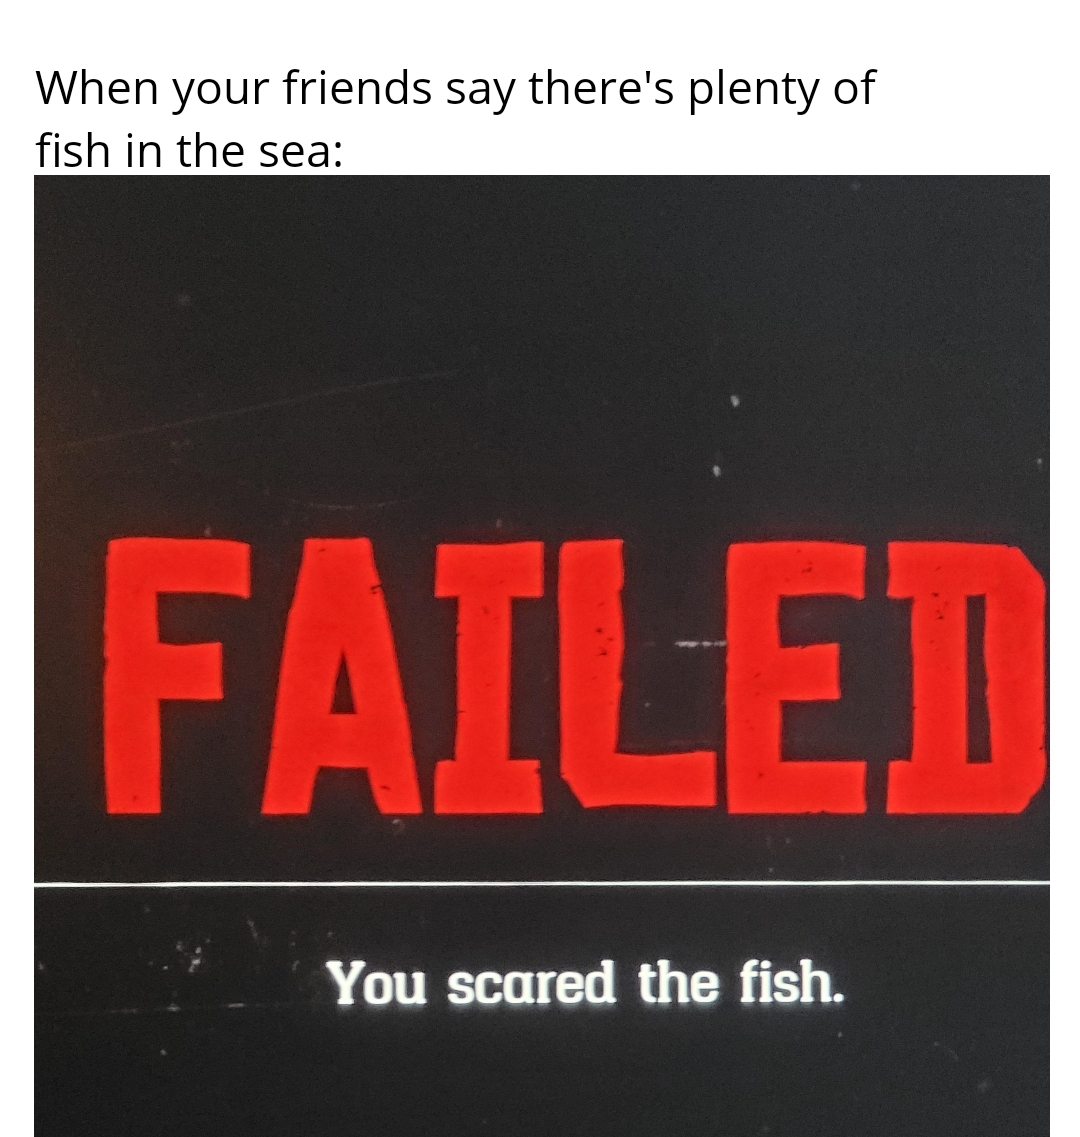 funny gaming memes - pcf - When your friends say there's plenty of fish in the sea Failed You scared the fish.